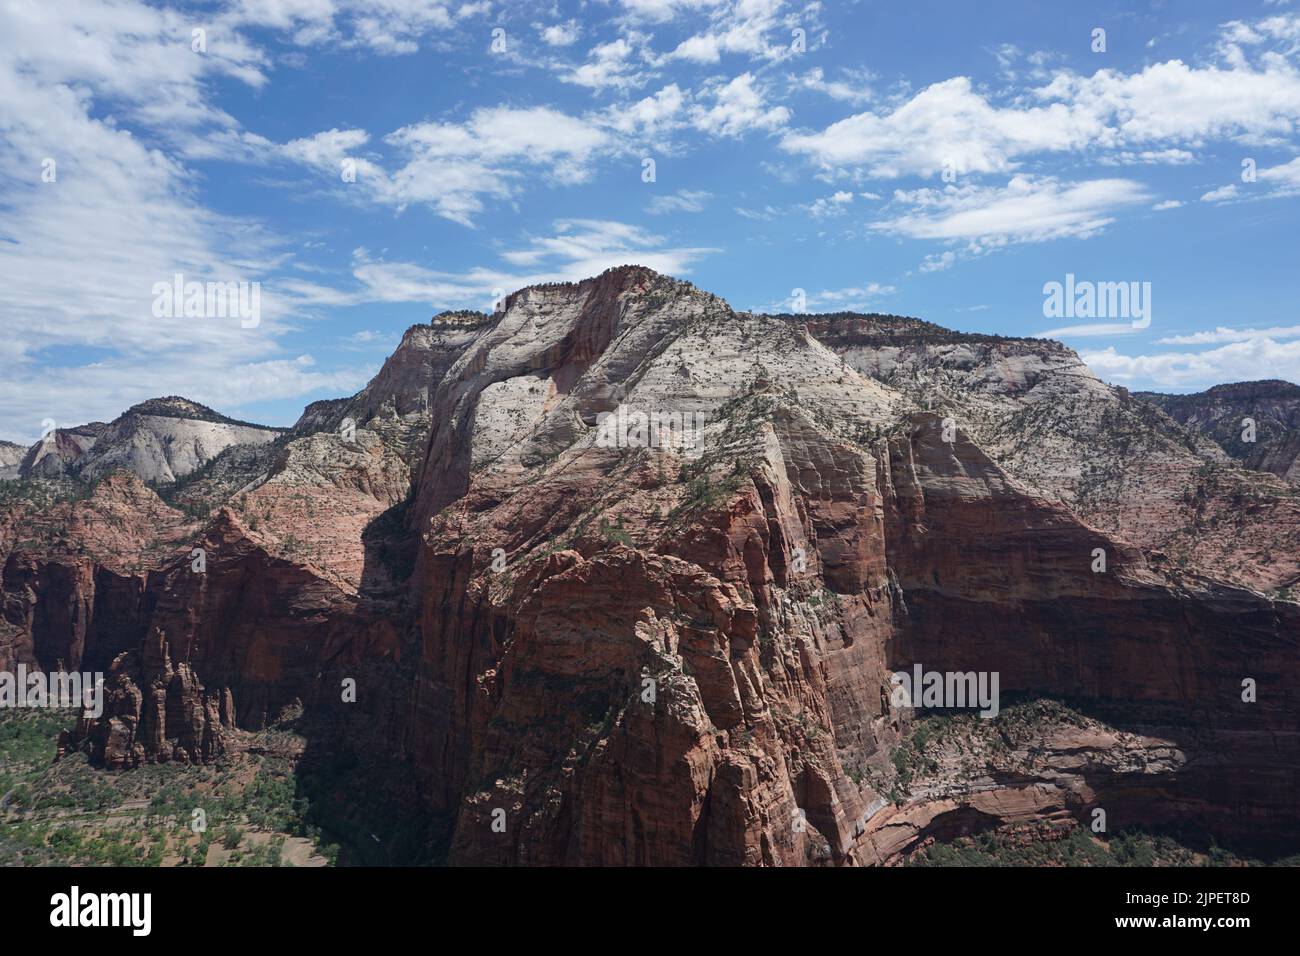 Mountain viewed from Angels Landing, Zion National Park, Utah, United States Stock Photo